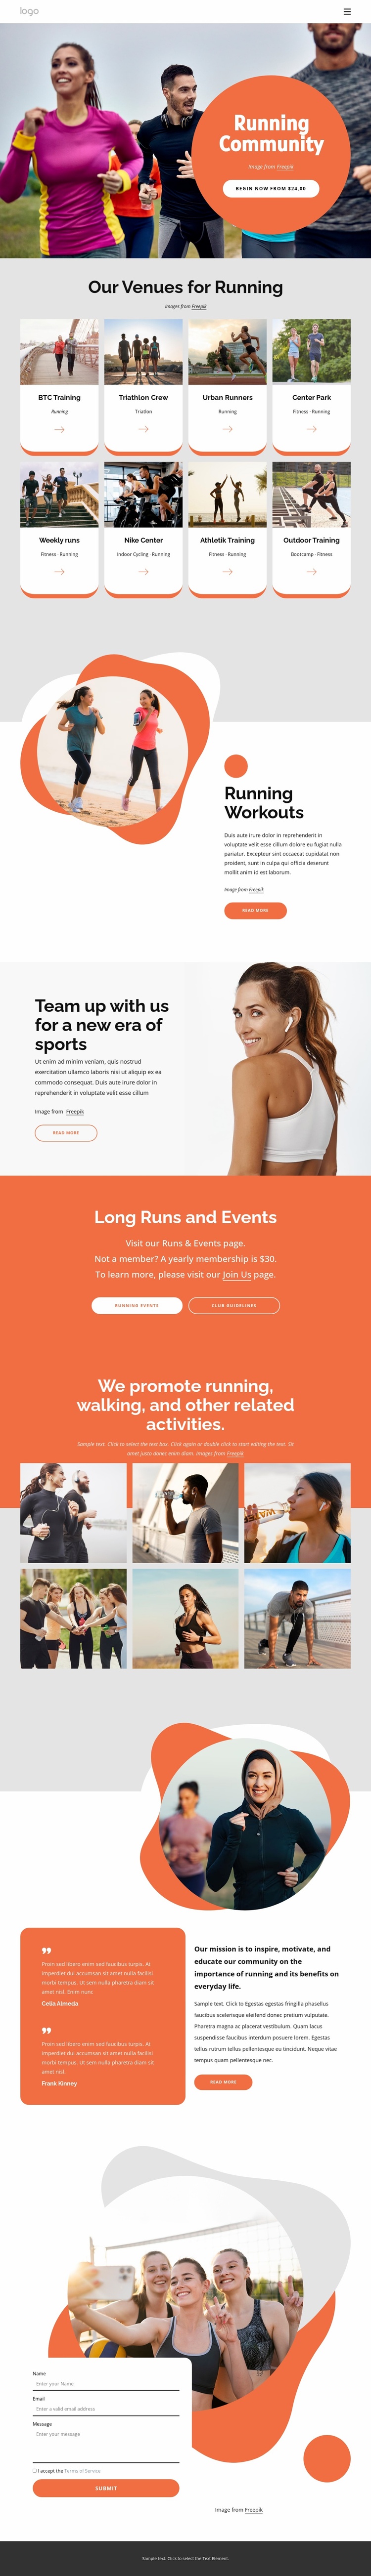 About Running Club eCommerce Template